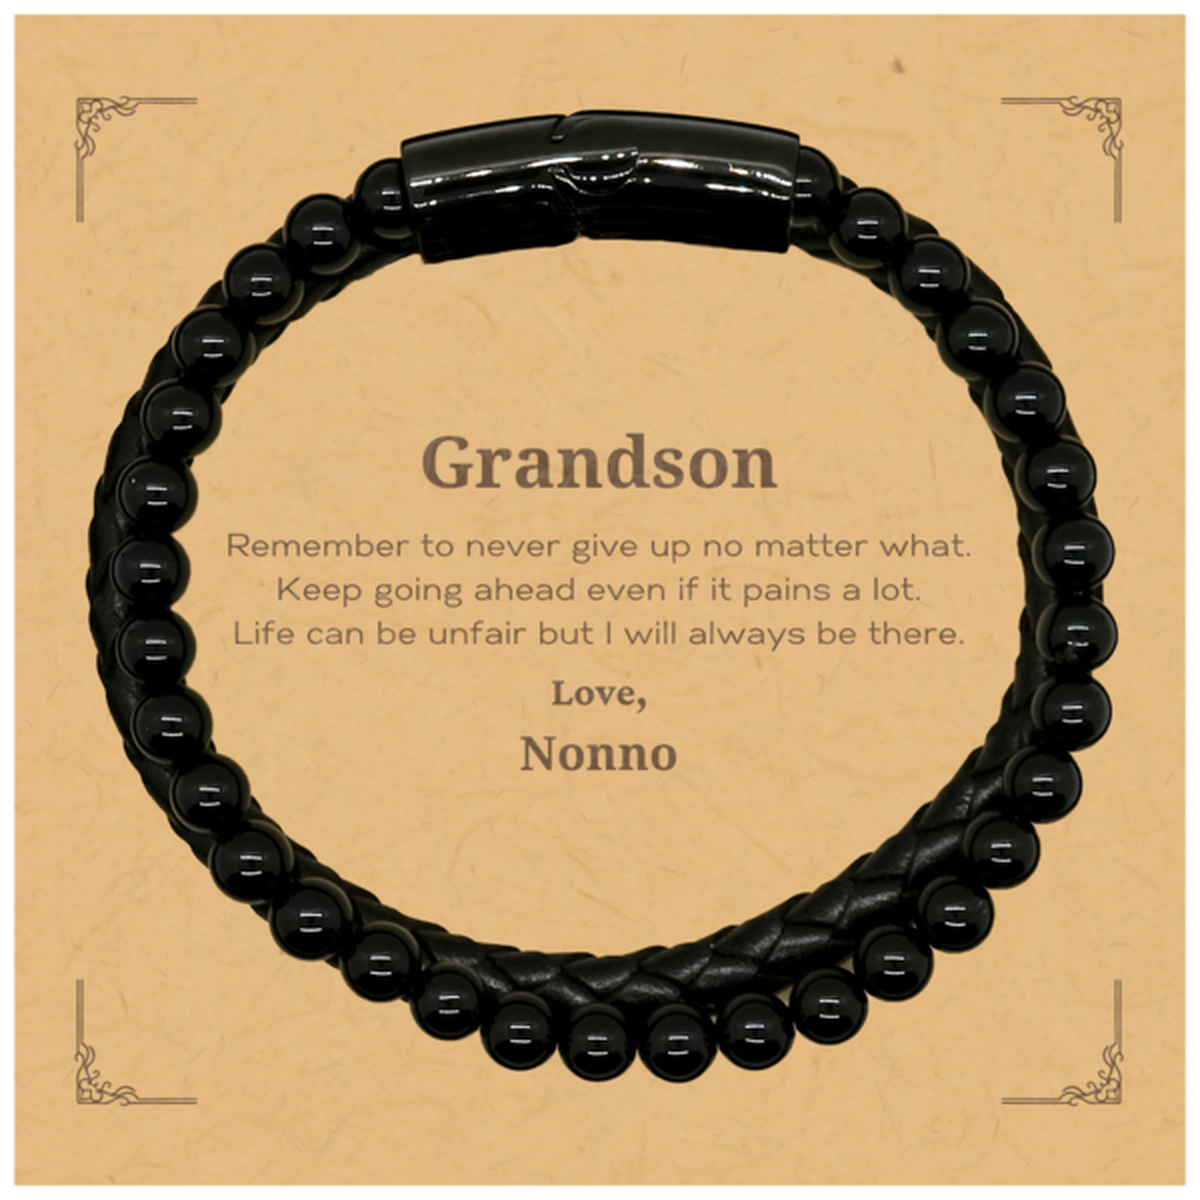 Grandson Motivational Gifts from Nonno, Remember to never give up no matter what, Inspirational Birthday Stone Leather Bracelets for Grandson